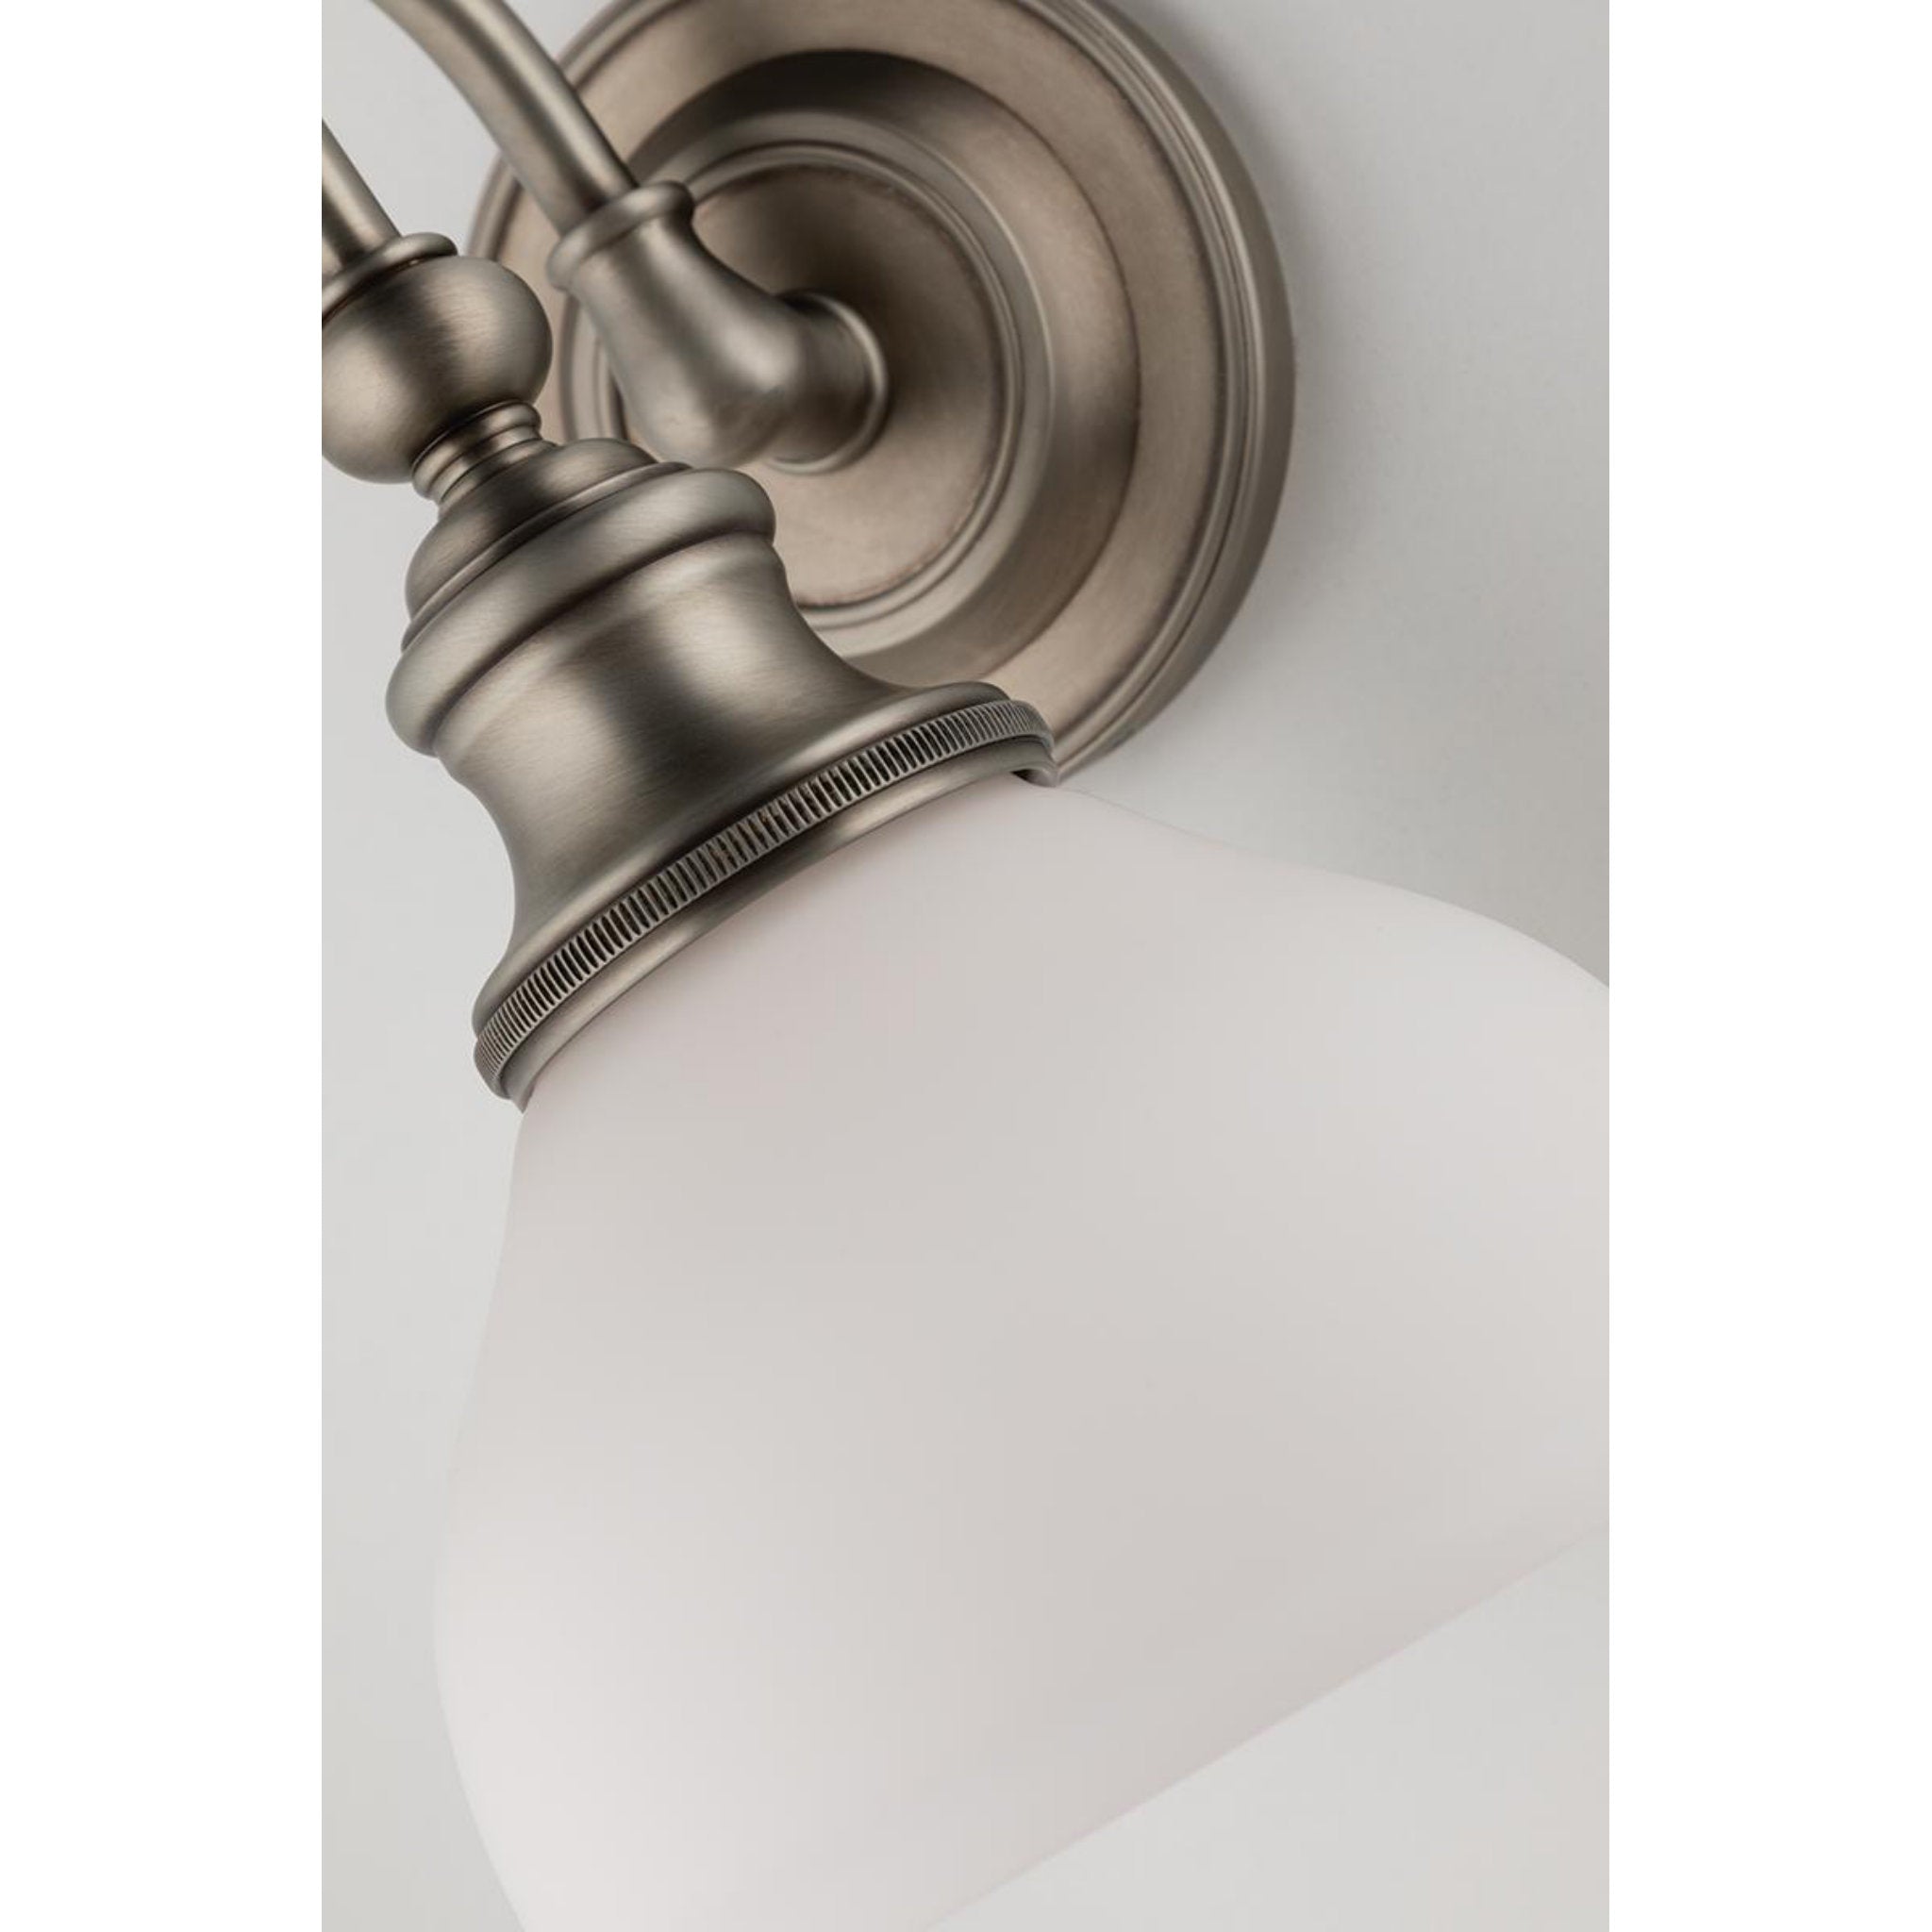 Sutton 1 Light Bath and Vanity in Polished Nickel